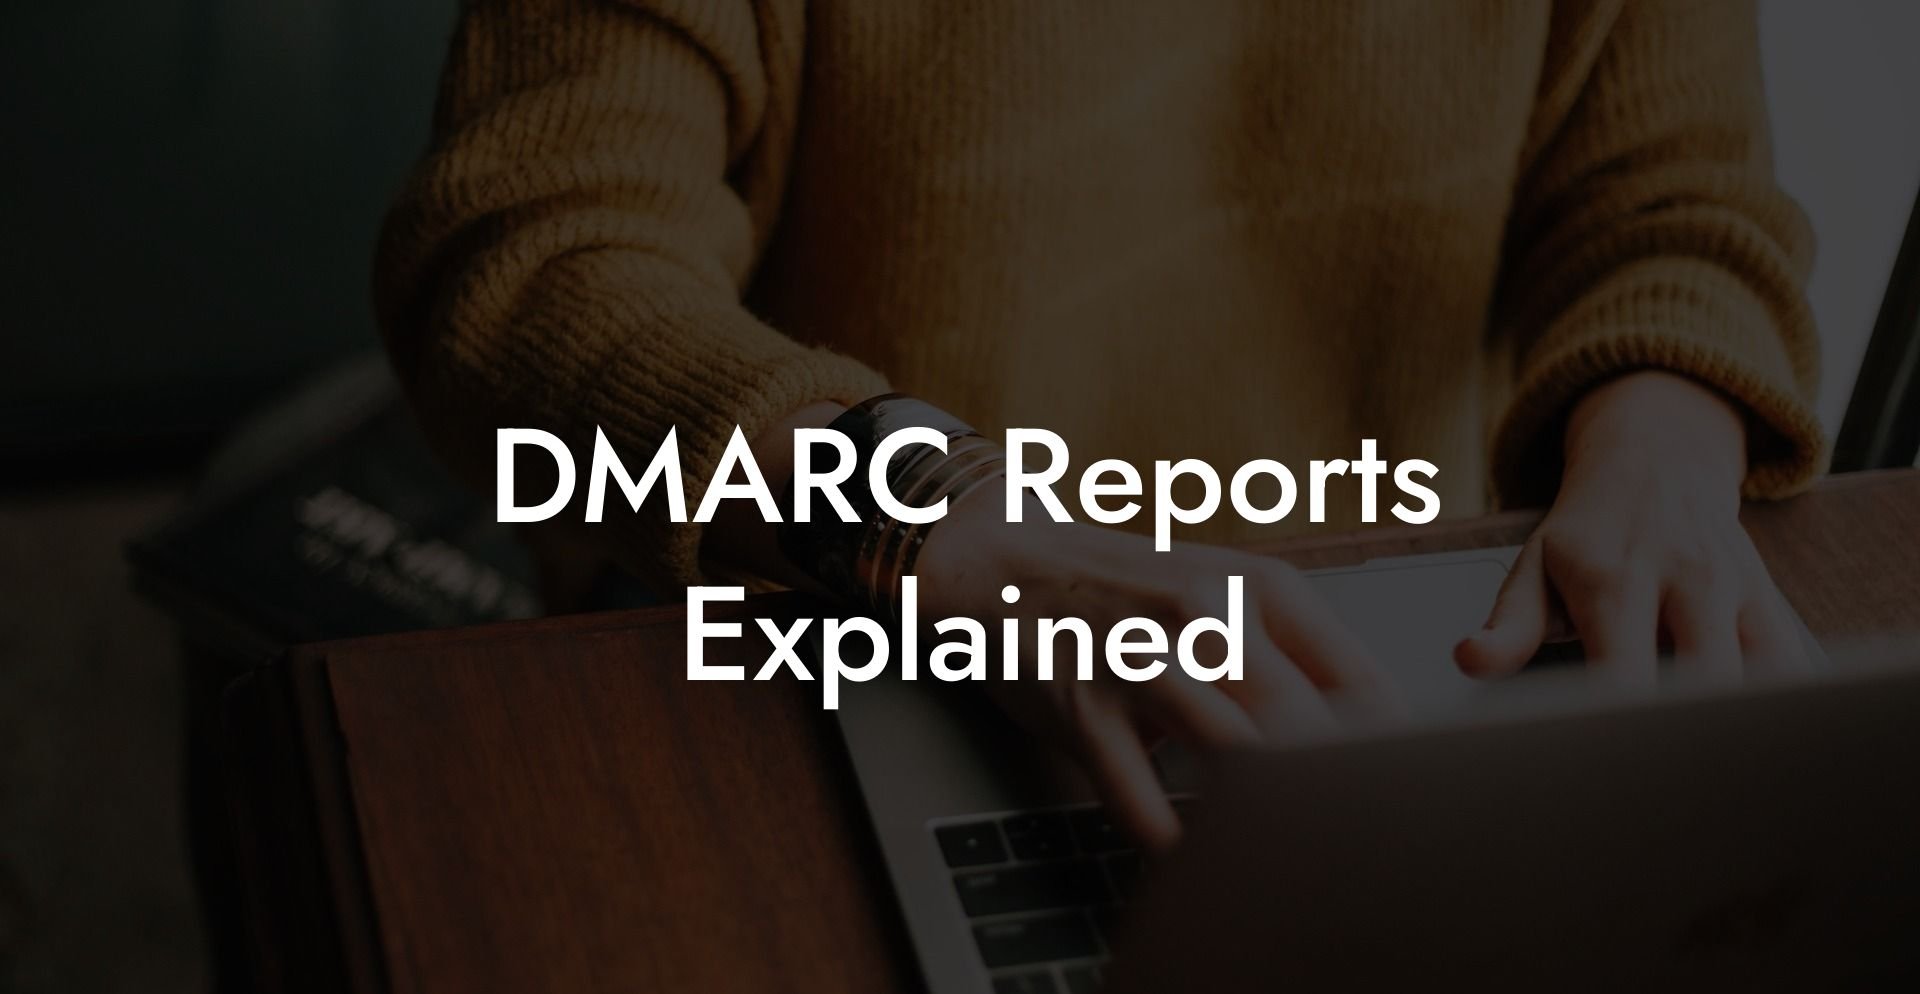 DMARC Reports Explained